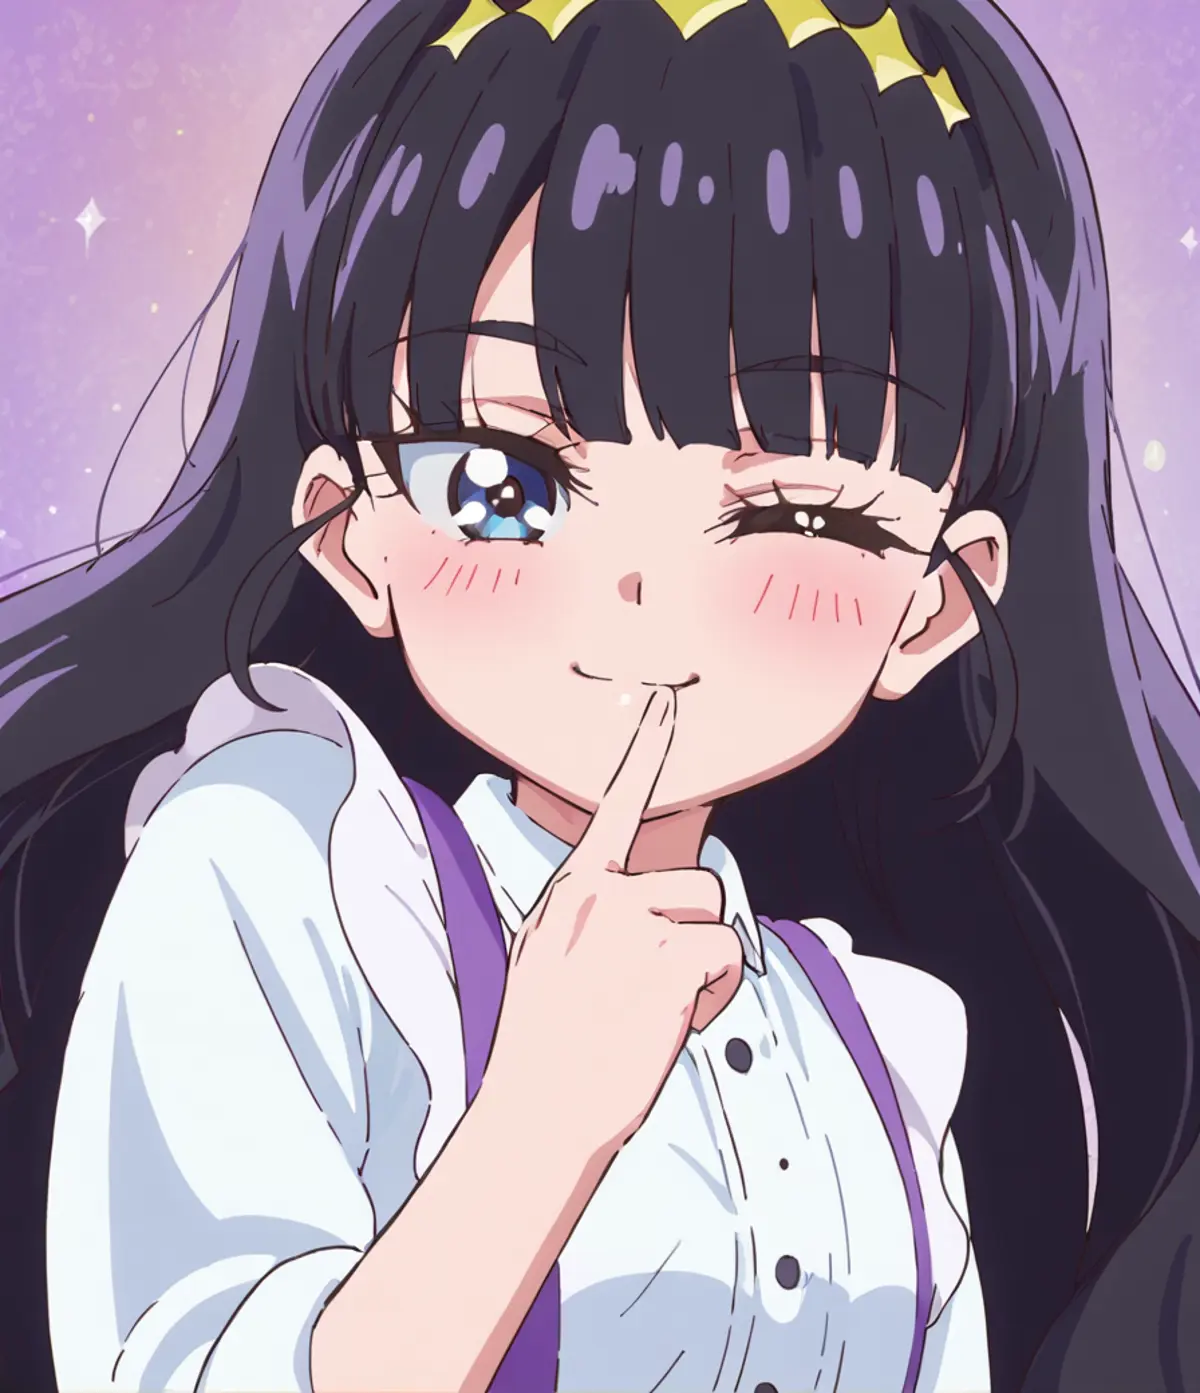 A girl with long, dark hair and blue eyes wearing a white blouse with purple suspenders, and a gold headband adorns her hair. The girl is smiling and winking, holding her finger to her lips. The background is a soft, purple gradient, which complements the girl's attire and enhances the overall aesthetic of the image.